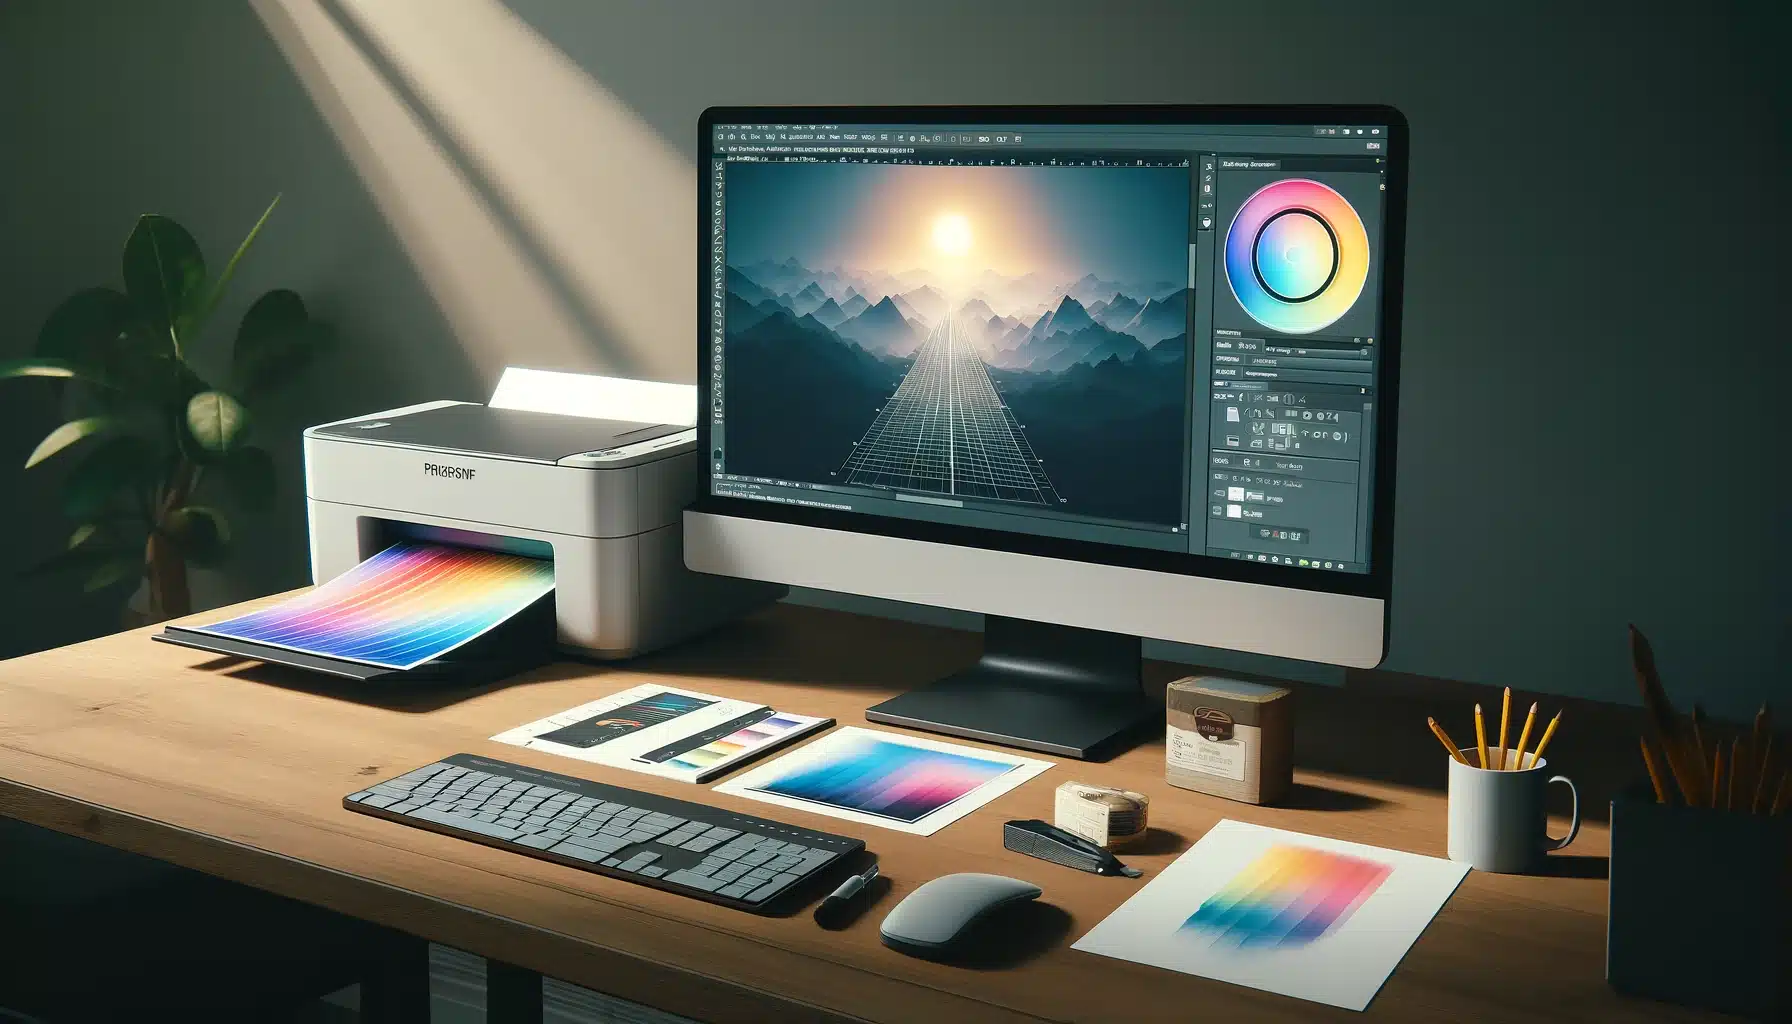 Digital workspace, a monitor and a nearby printer producing a gradient image, demonstrating the print process for digital designs.